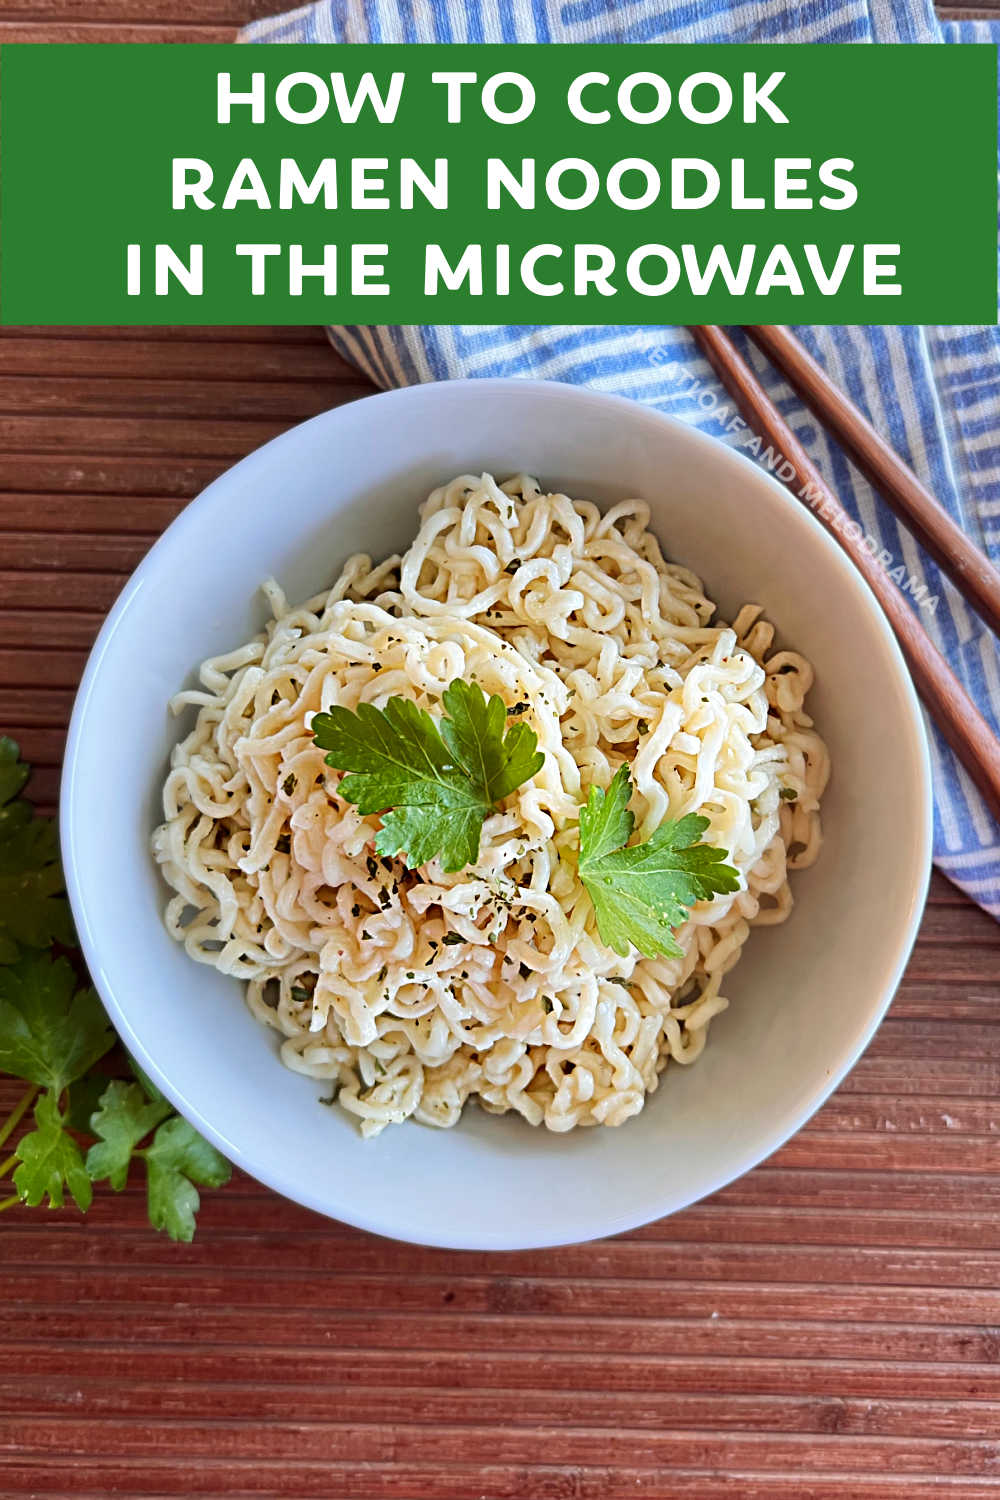 You can cook ramen noodles in the microwave in a matter of minutes with this easy recipe for microwave ramen. Perfect for meal prep or an instant meal!  via @meamel